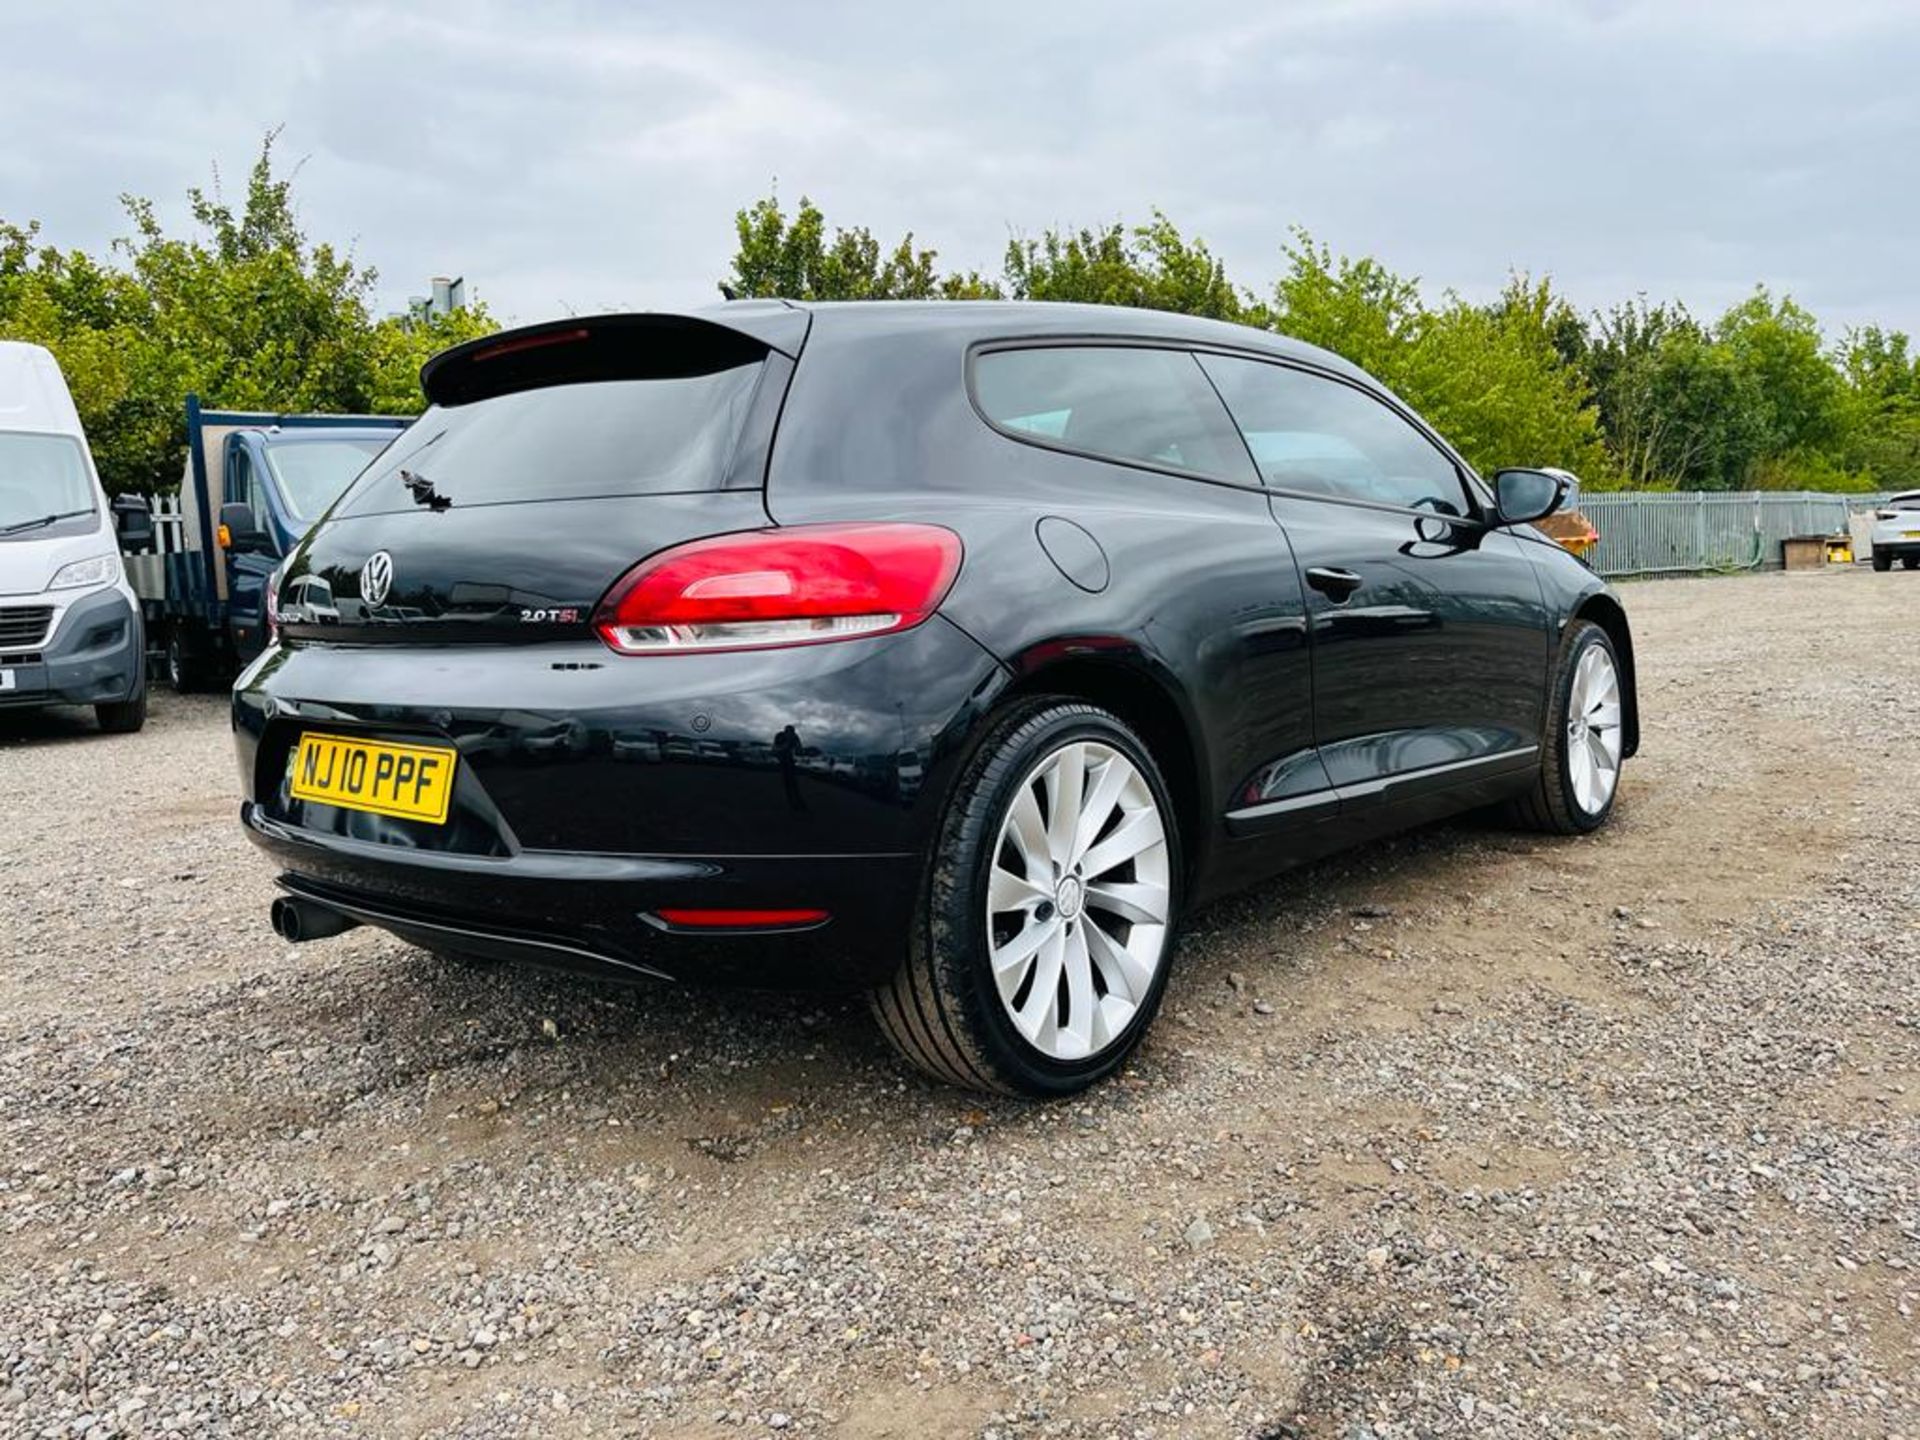 ** ON SALE ** Volkswagen Scirocco GT 2.0 TSI 210 Coupe 2010 '10 Reg' Sat Nav - A/C - Only 78719 - Image 8 of 25